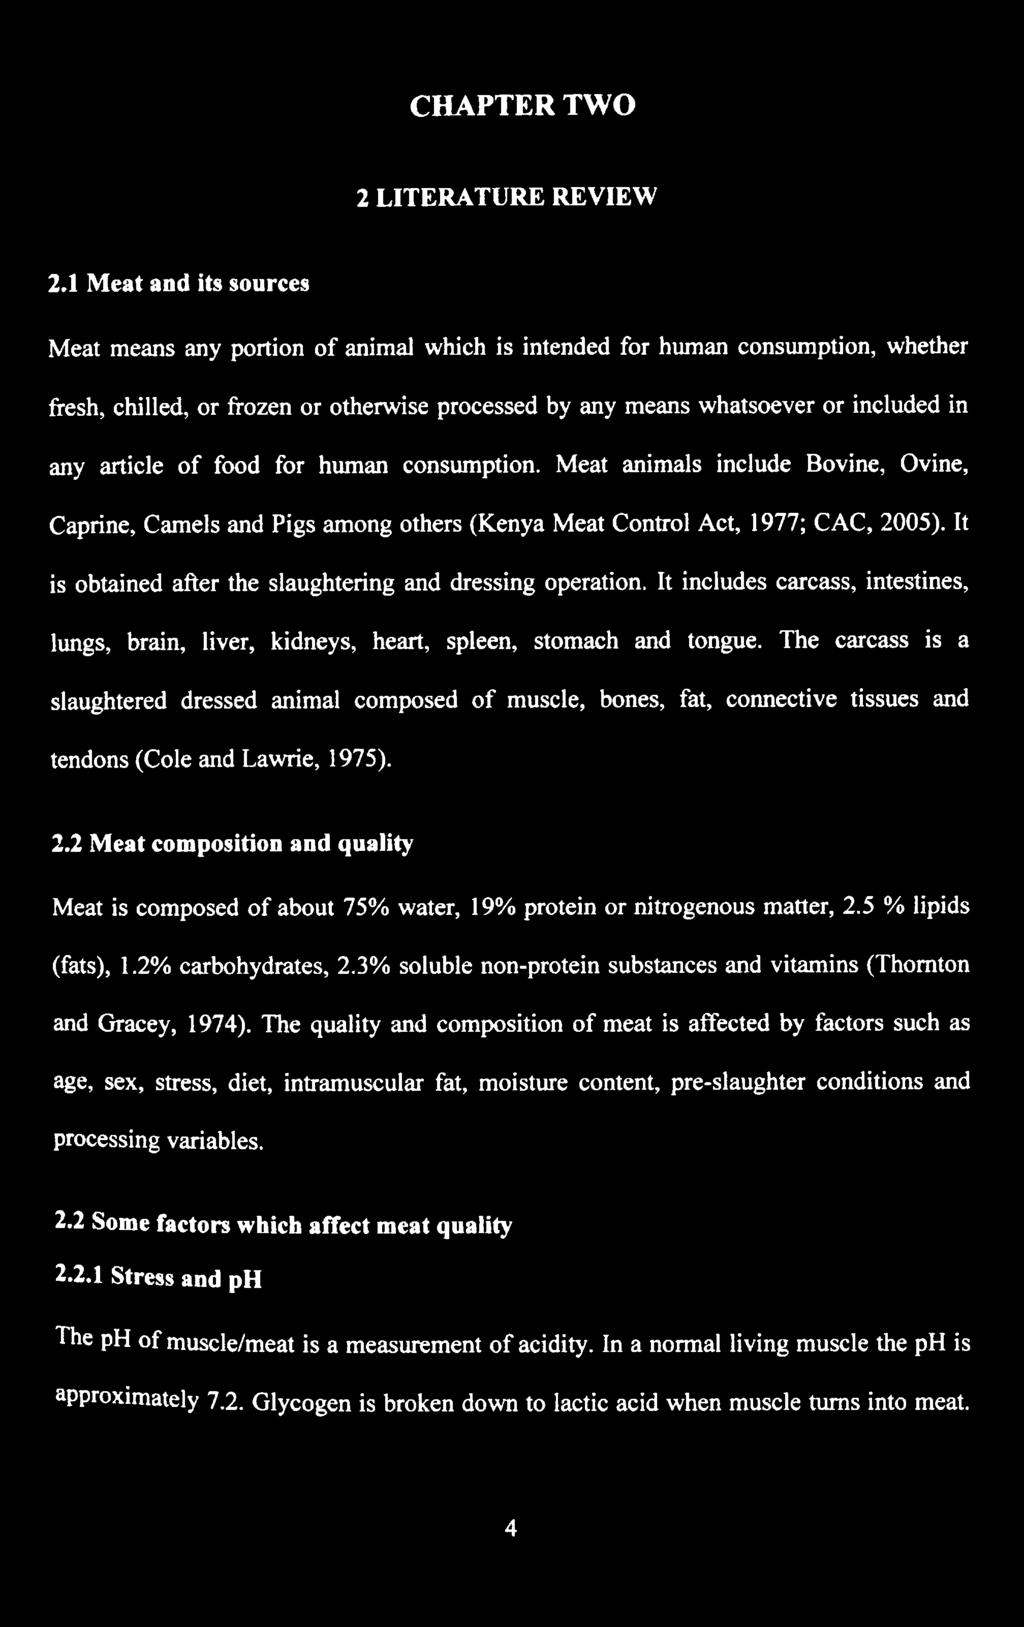 article of food for human consumption. Meat animals include Bovine, Ovine, Caprine, Camels and Pigs among others (Kenya Meat Control Act, 1977; CAC, 2005).